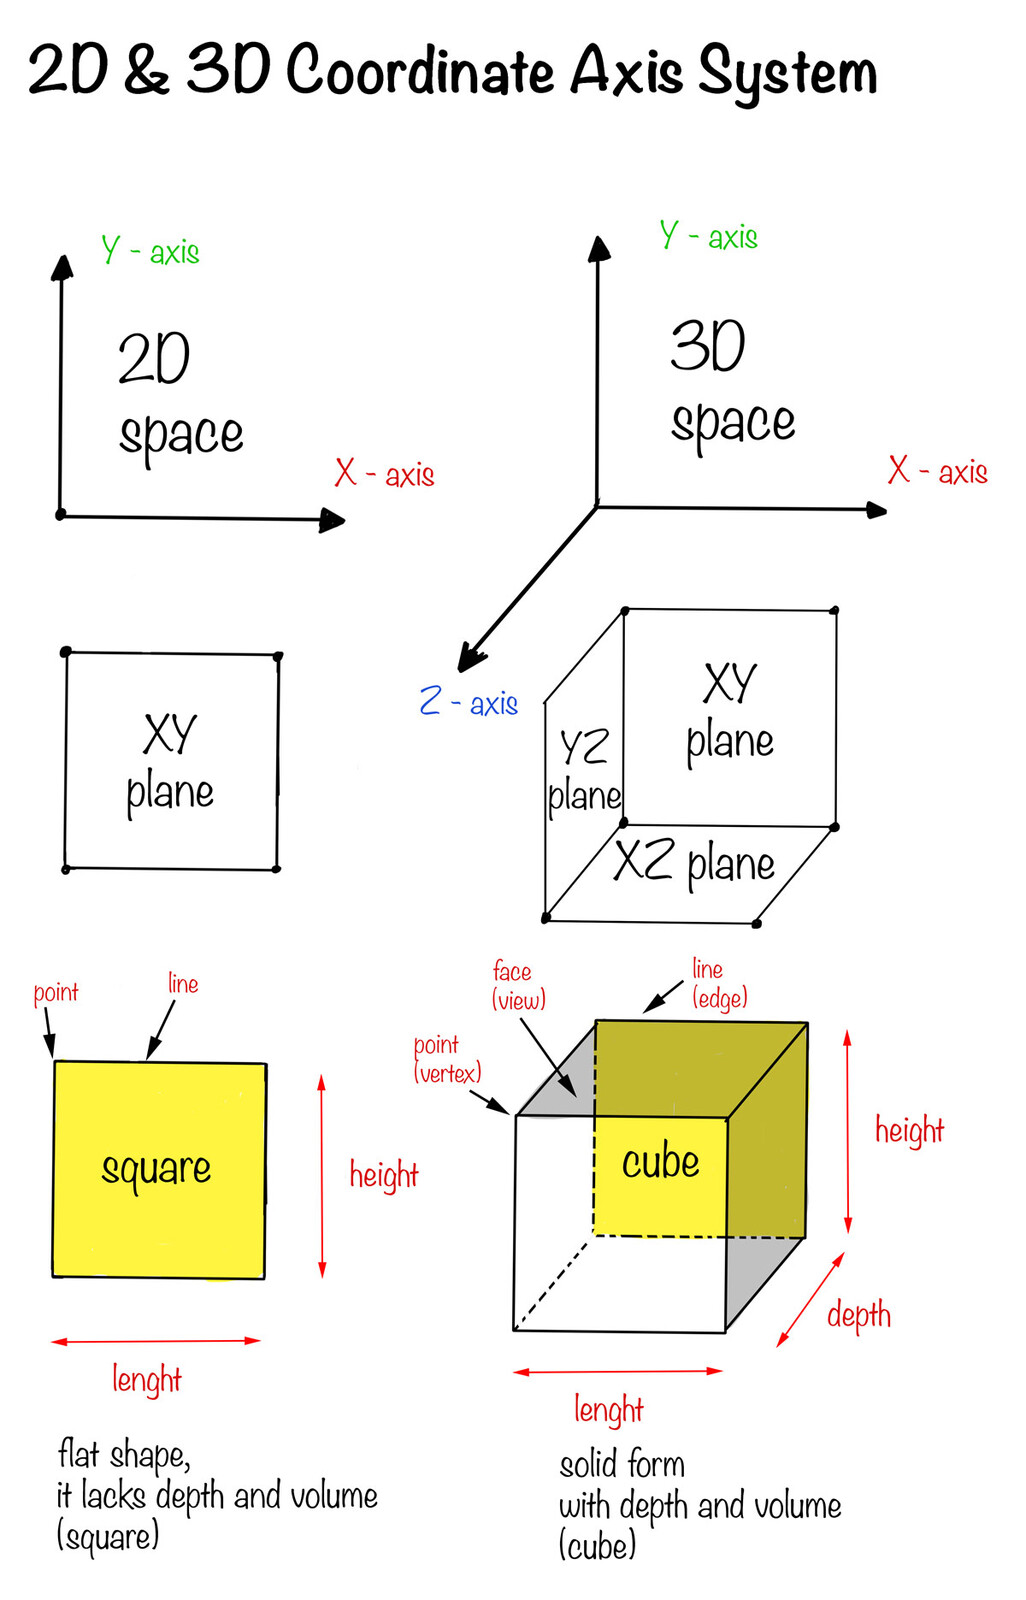 2D space vs 3D space. Before we start doing the exercises, I have to define what 2D and 3D actually means. It’s important to have a good grasp of the 2D/3D concept because it is the base for multiple types of arts, such as drawing, sketching, 3D modeling.